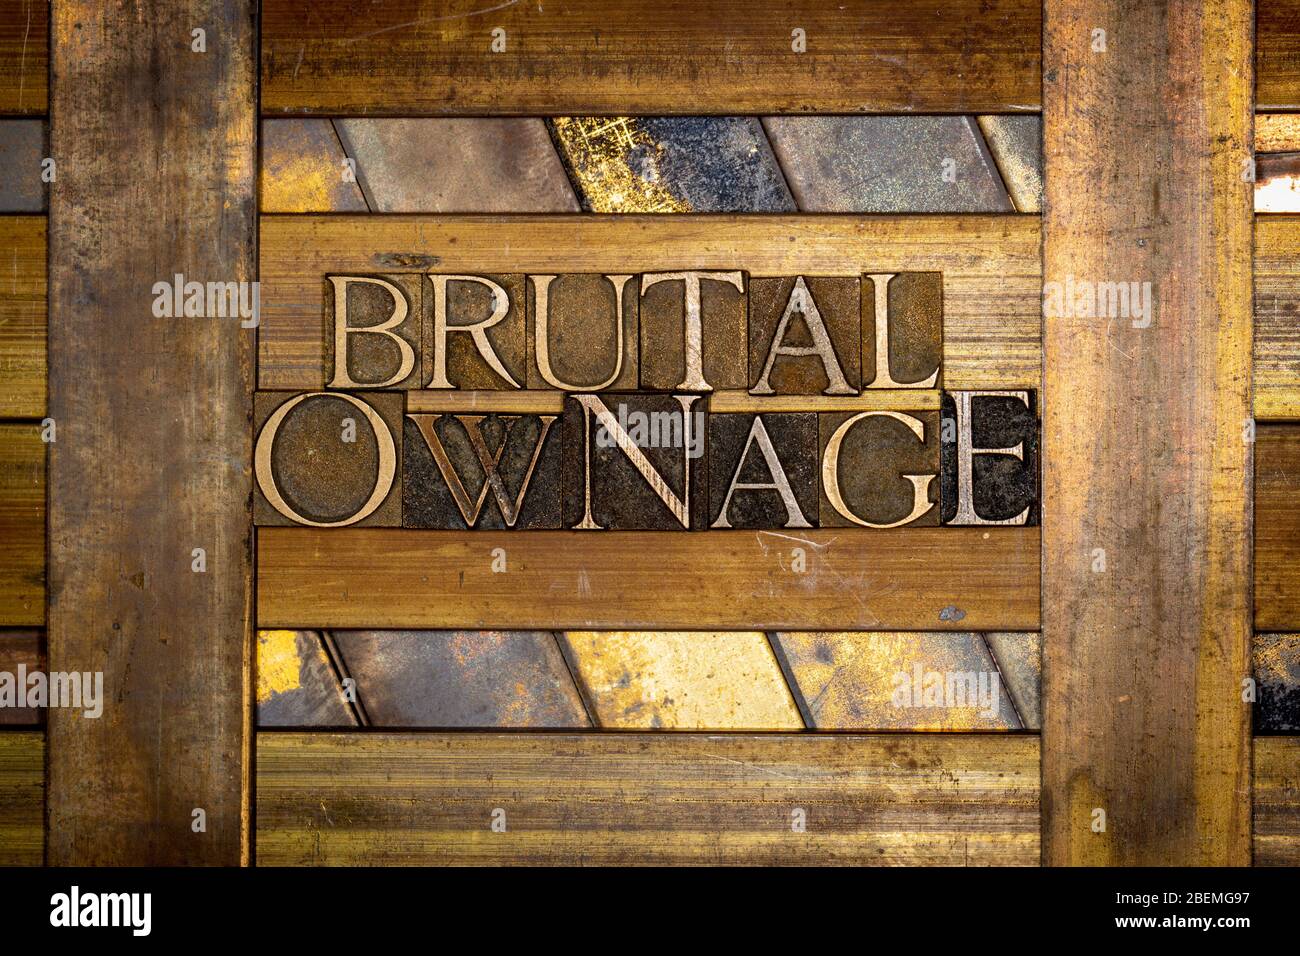 Photo of real authentic typeset letters forming Brutal Ownage text on vintage textured grunge copper and gold background Stock Photo